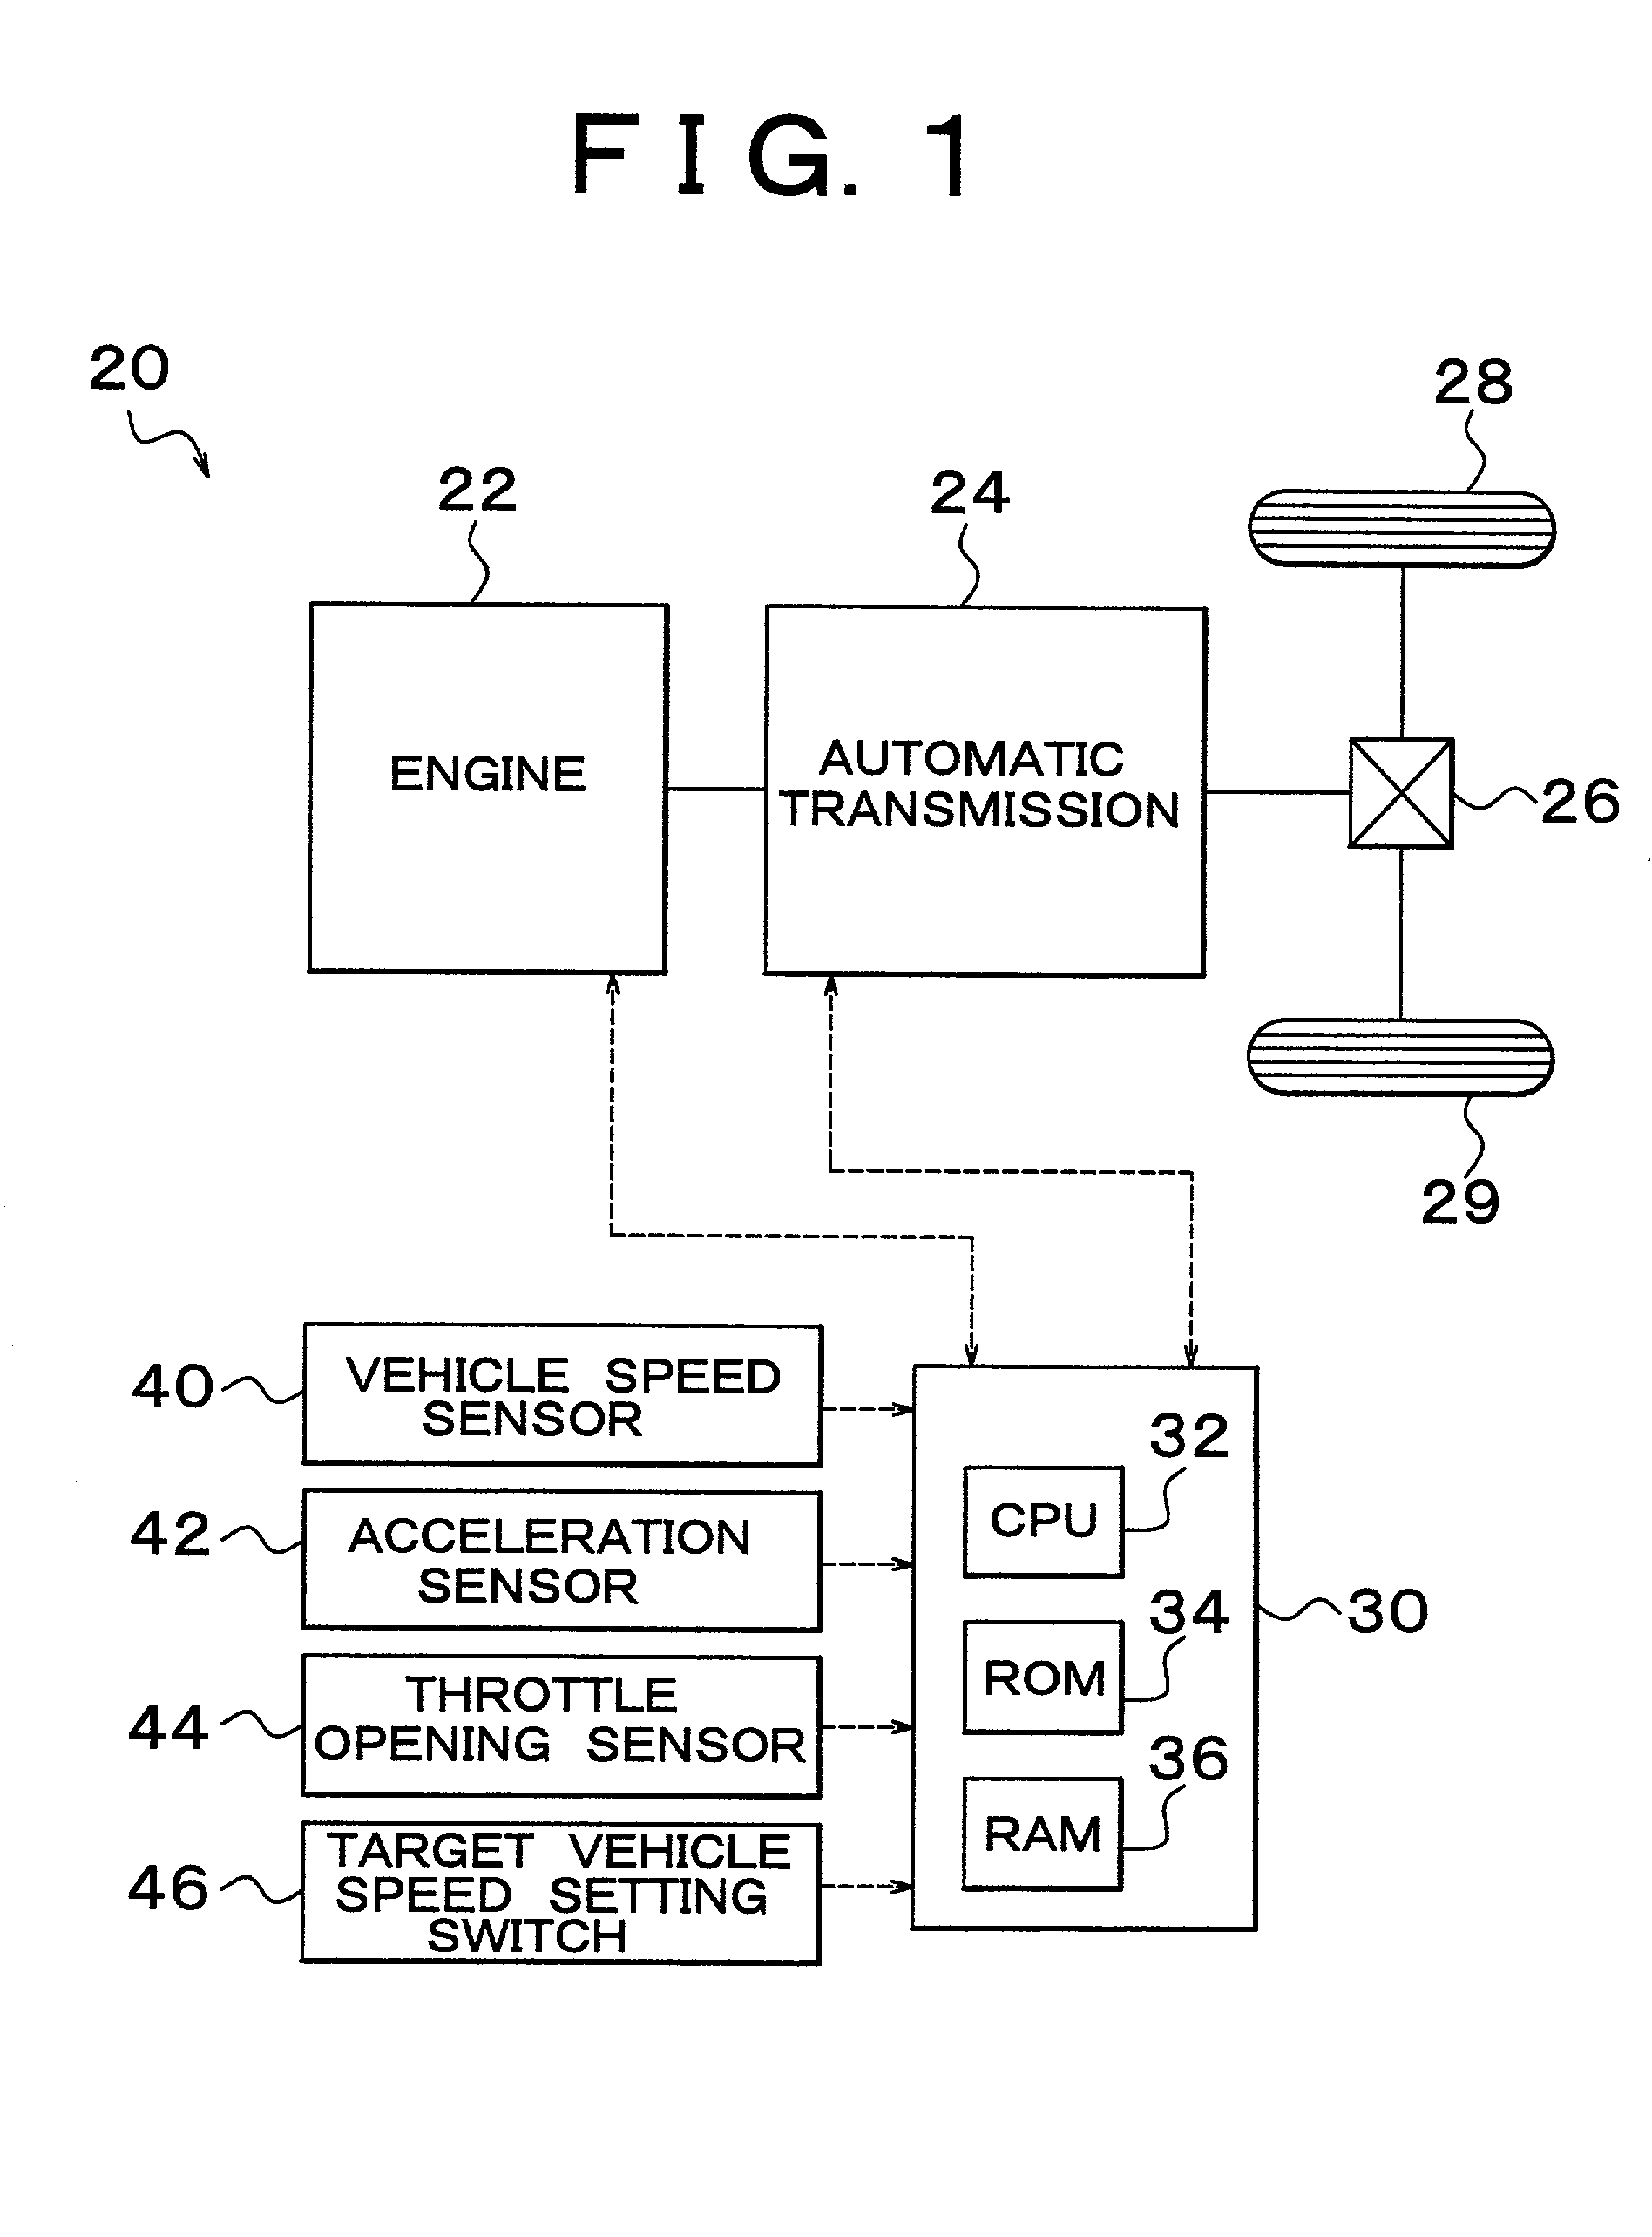 Vehicular constant-speed control apparatus and method of controlling vehicle speed